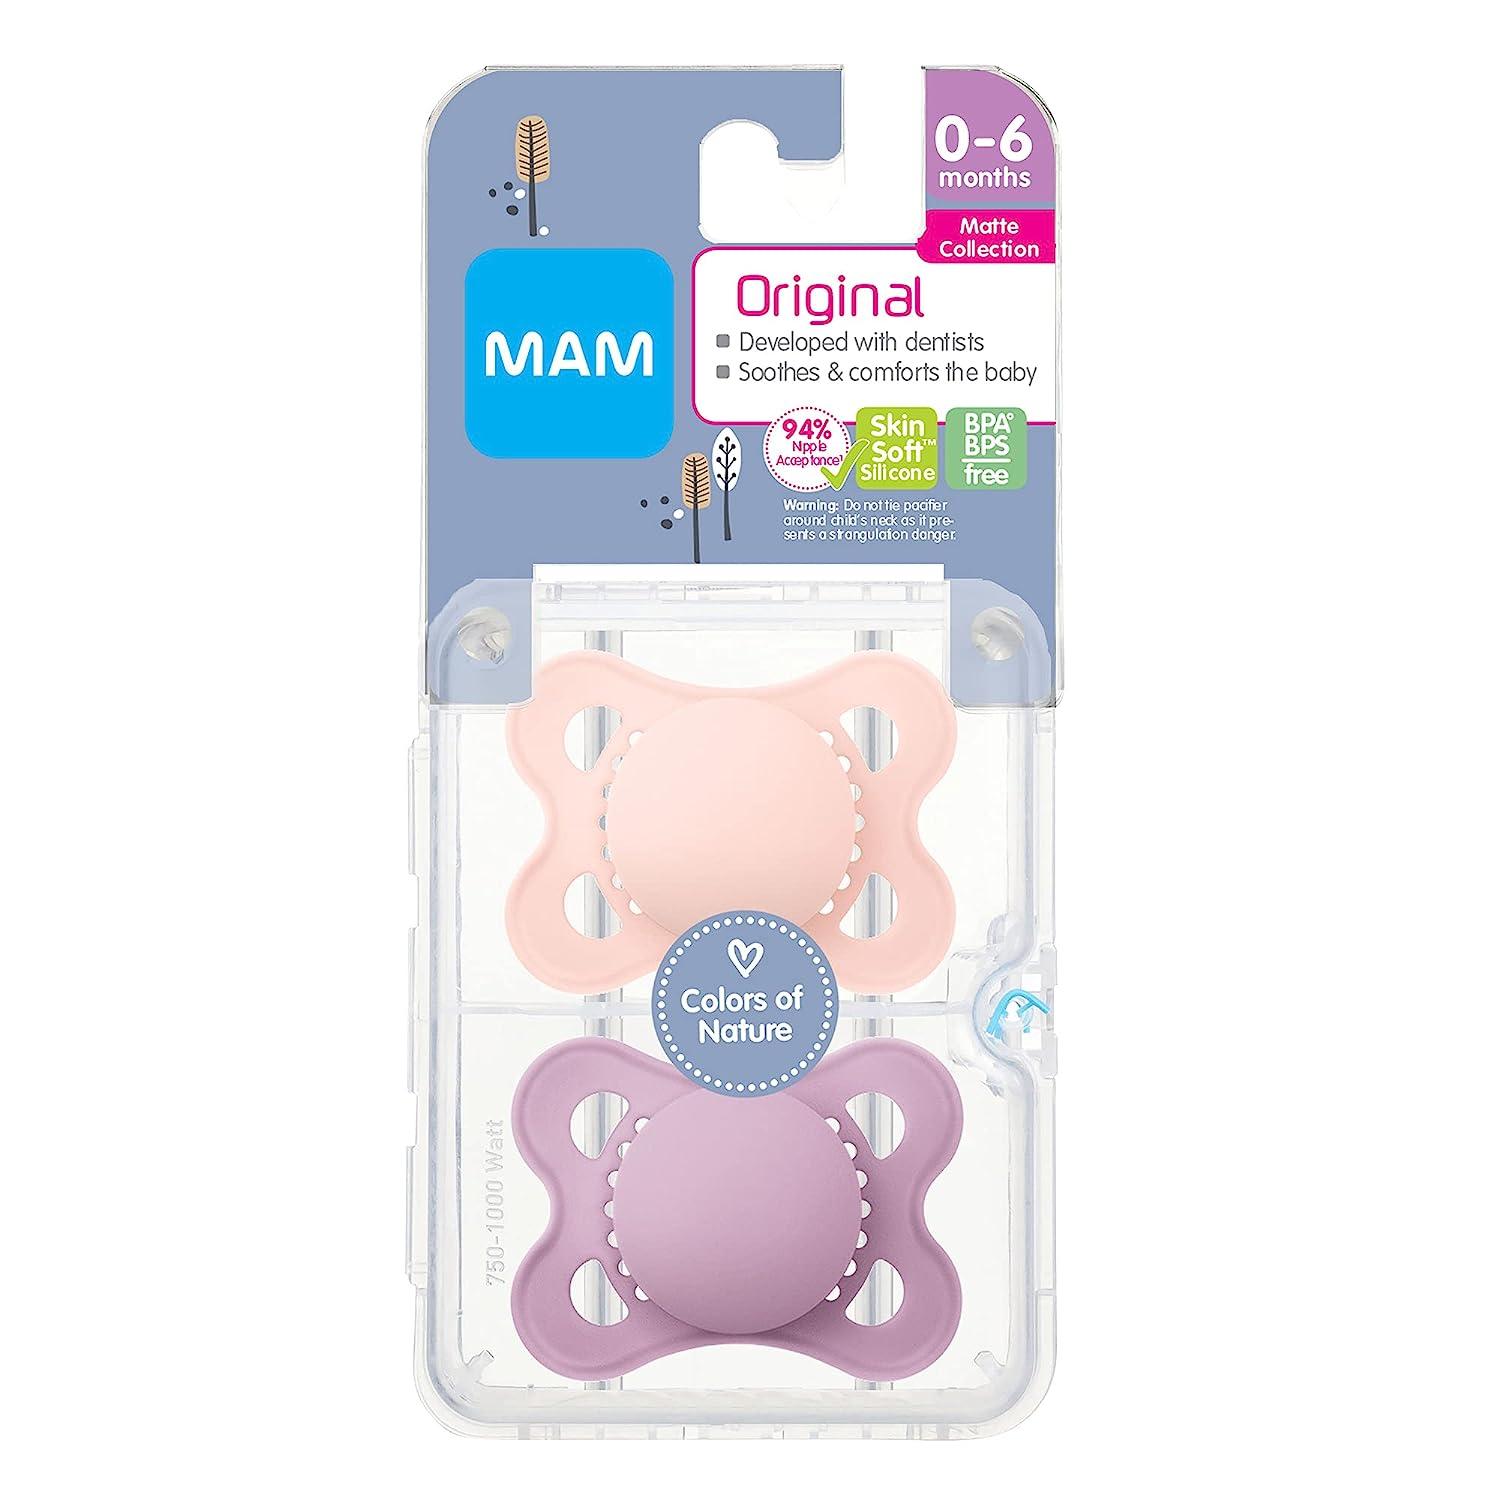 MAM Original Matte Baby Pacifier Nipple Shape Helps Promote Healthy Oral  Development Sterilizer Case 2 Pack 0-6 Months Girl 2 Count (Pack of 1) Girl  1 2 Count (Pack of 1)